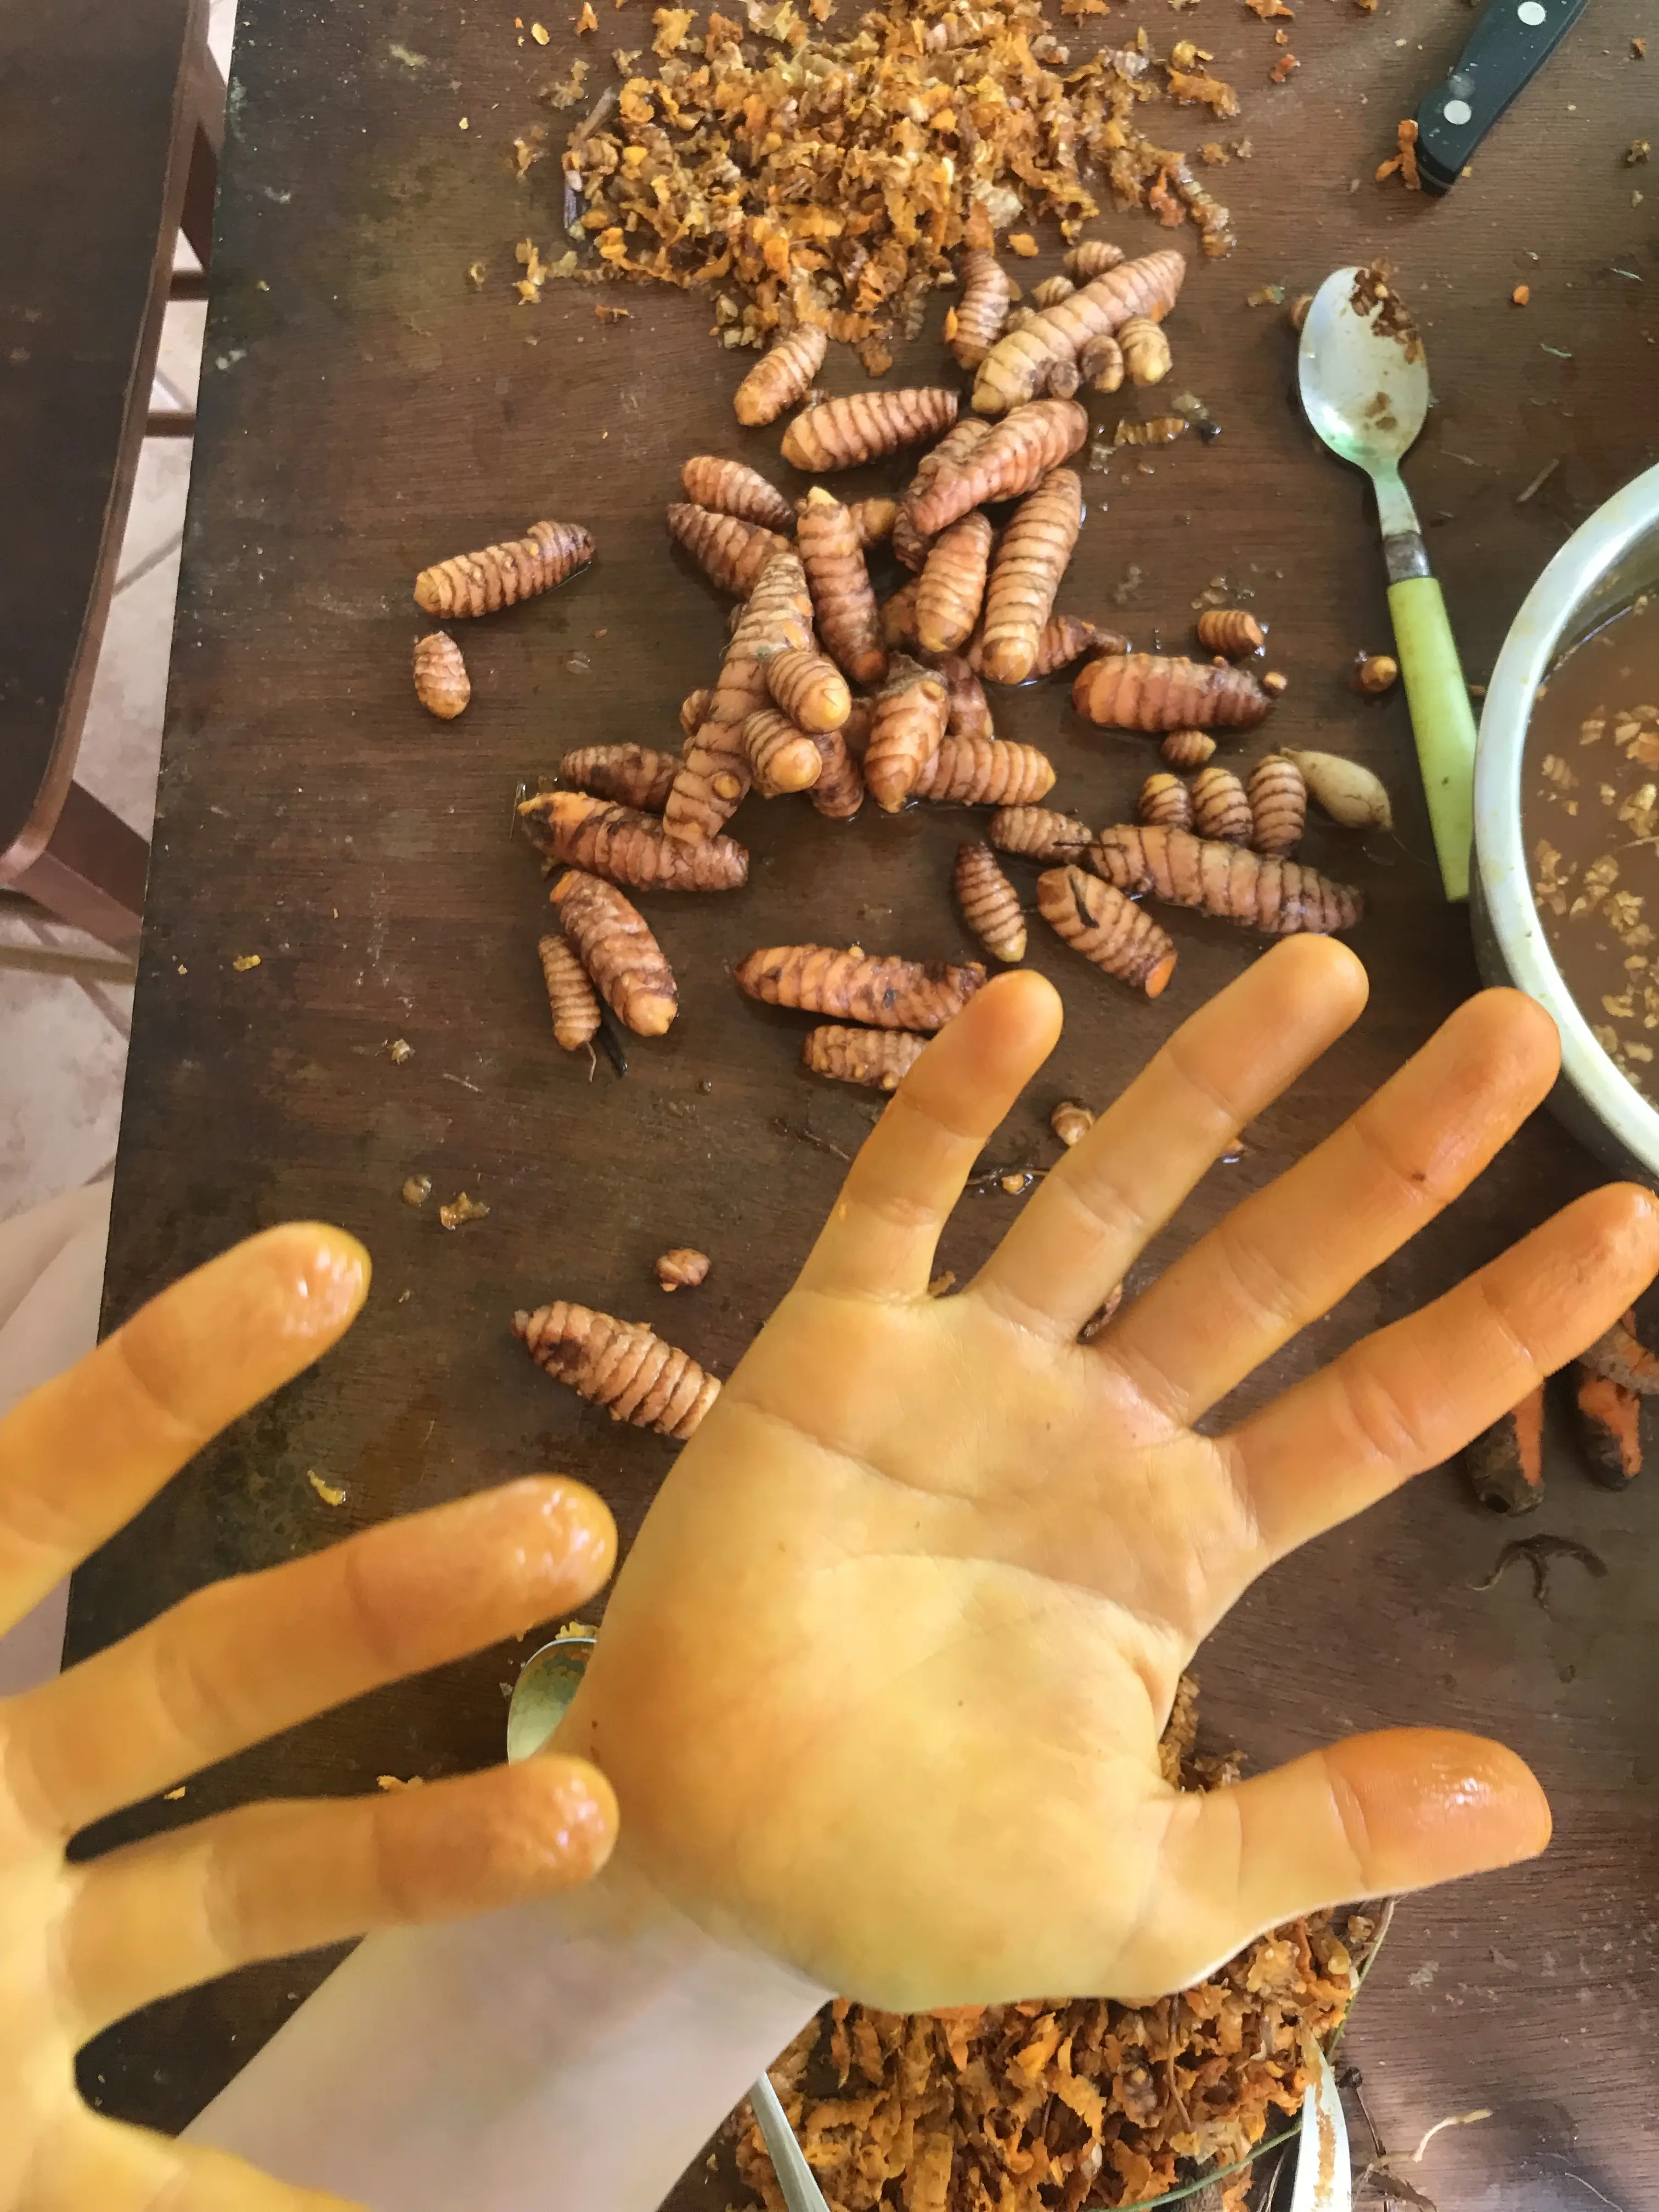 Yellow hands from processing fresh turmeric into dried and powdered turmeric.